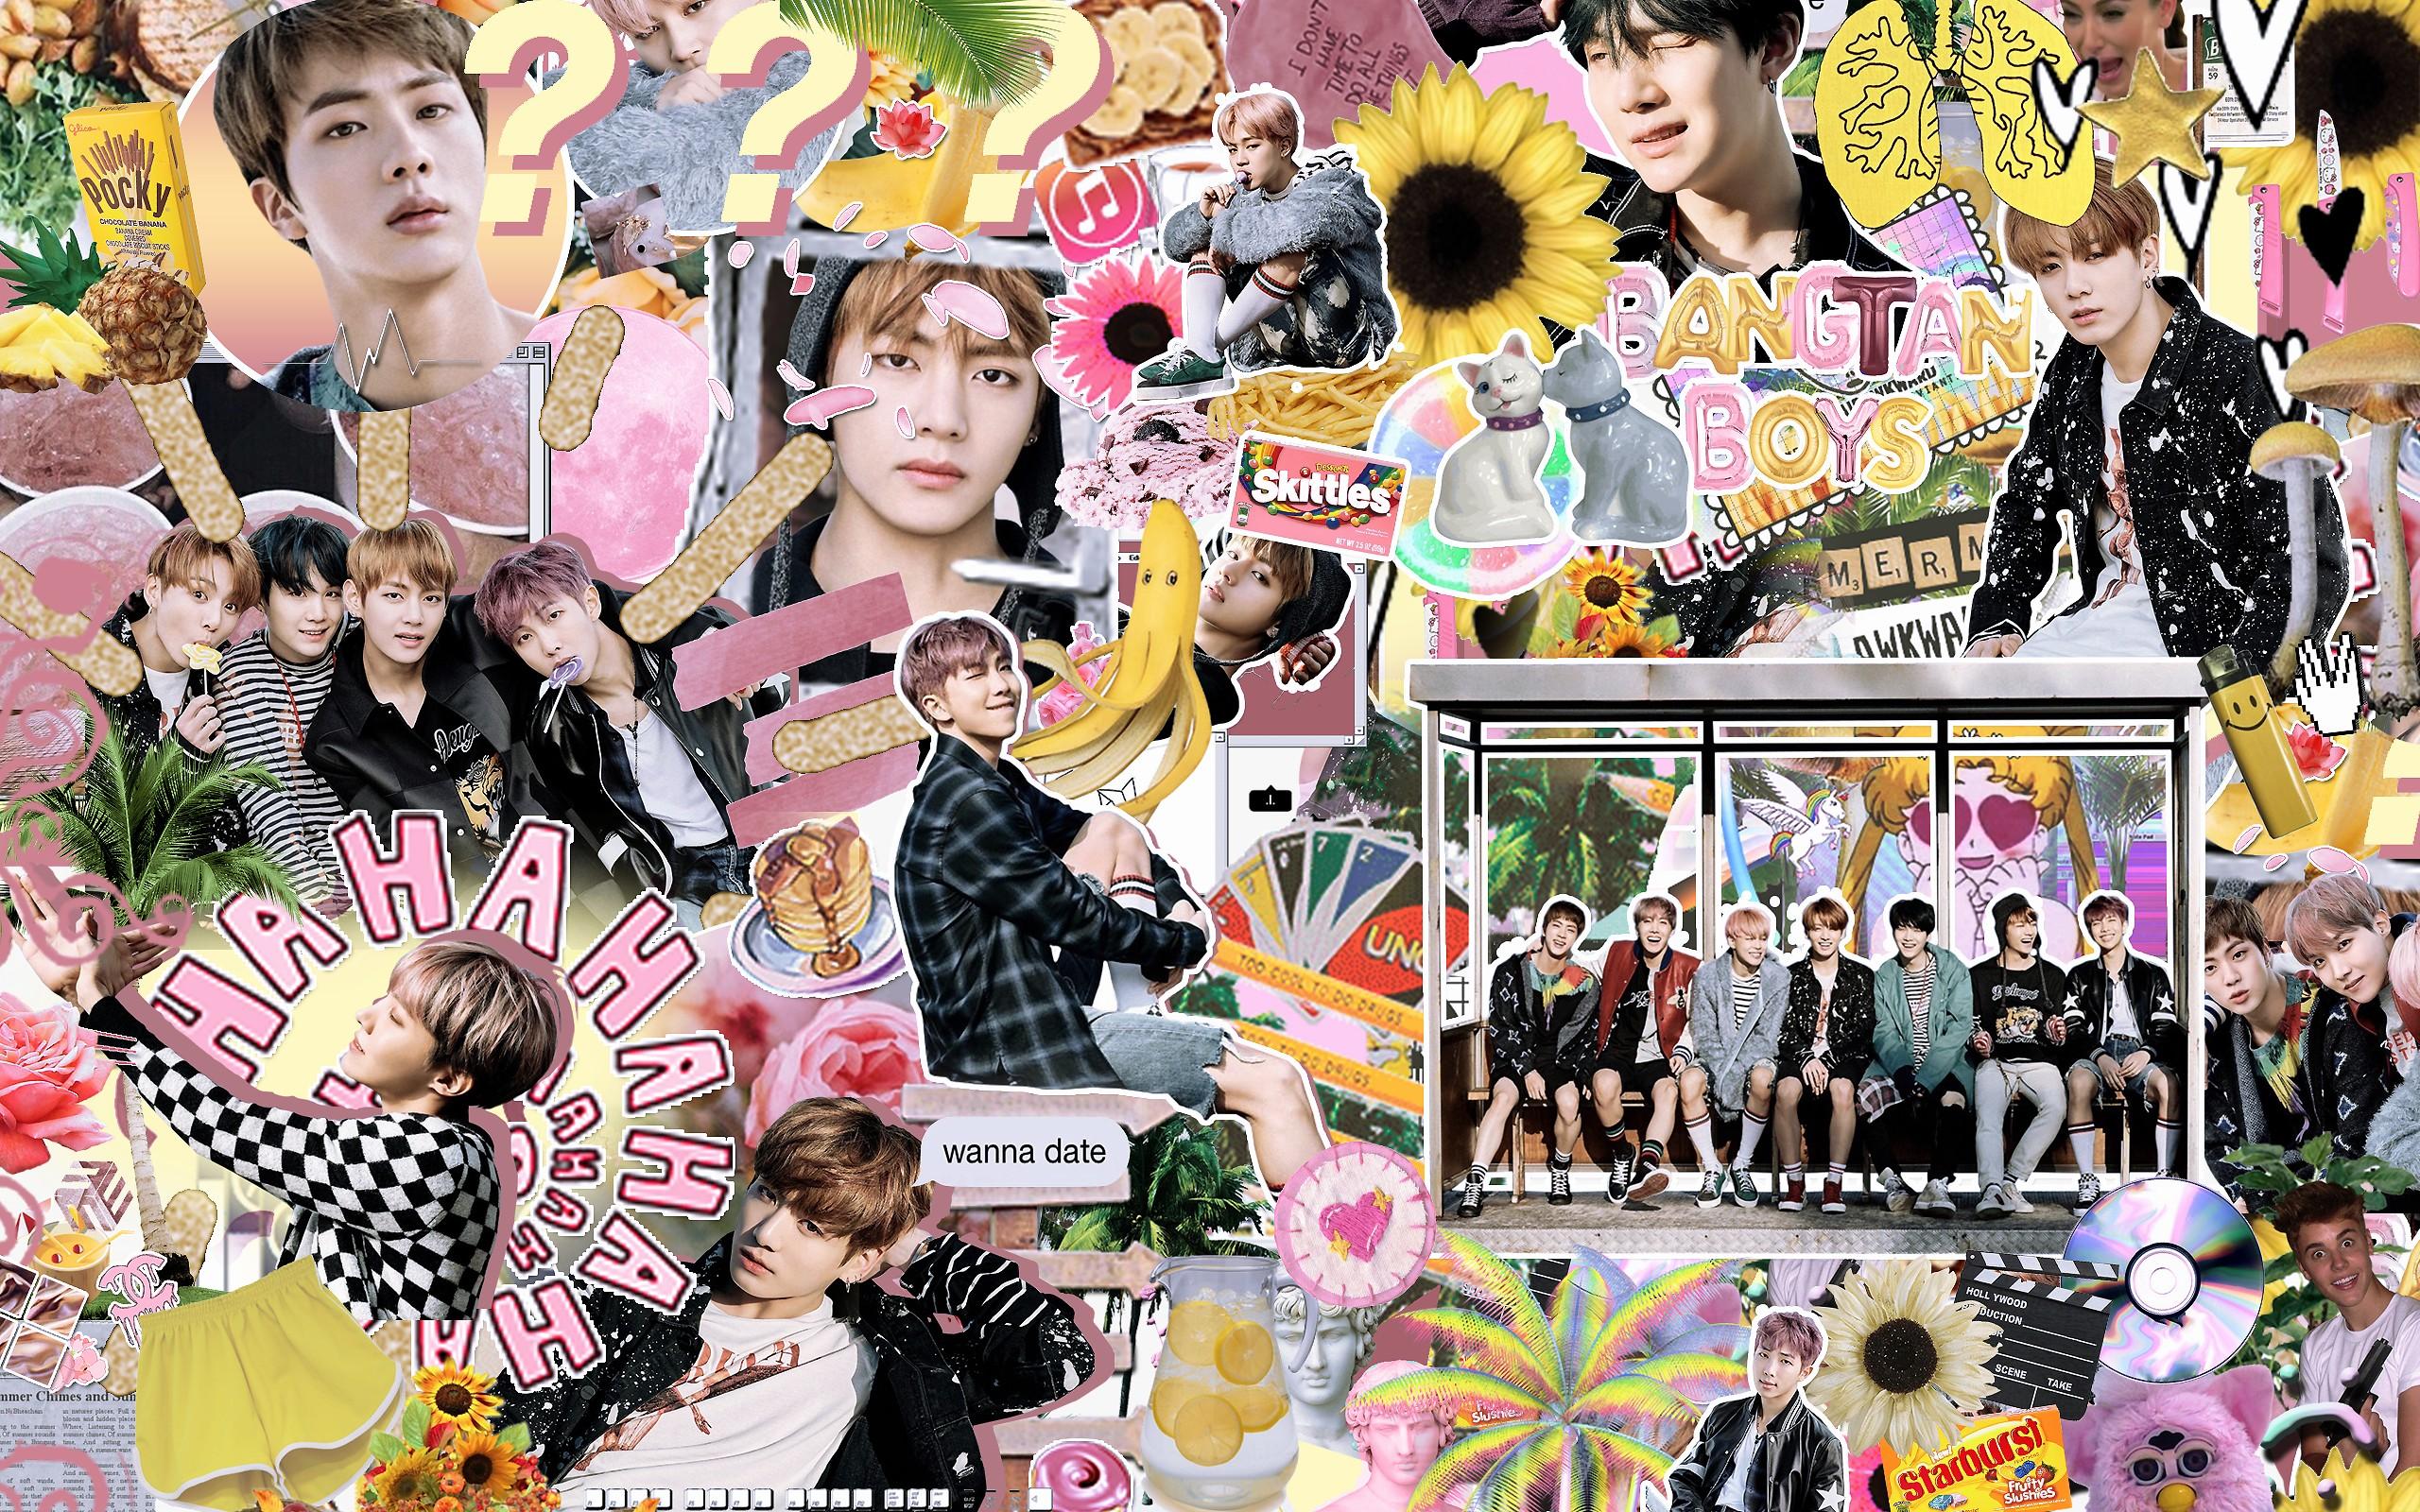 2560 x 1600 · jpeg - BTS wallpaper 1 Download free beautiful High Resolution wallpapers for ...